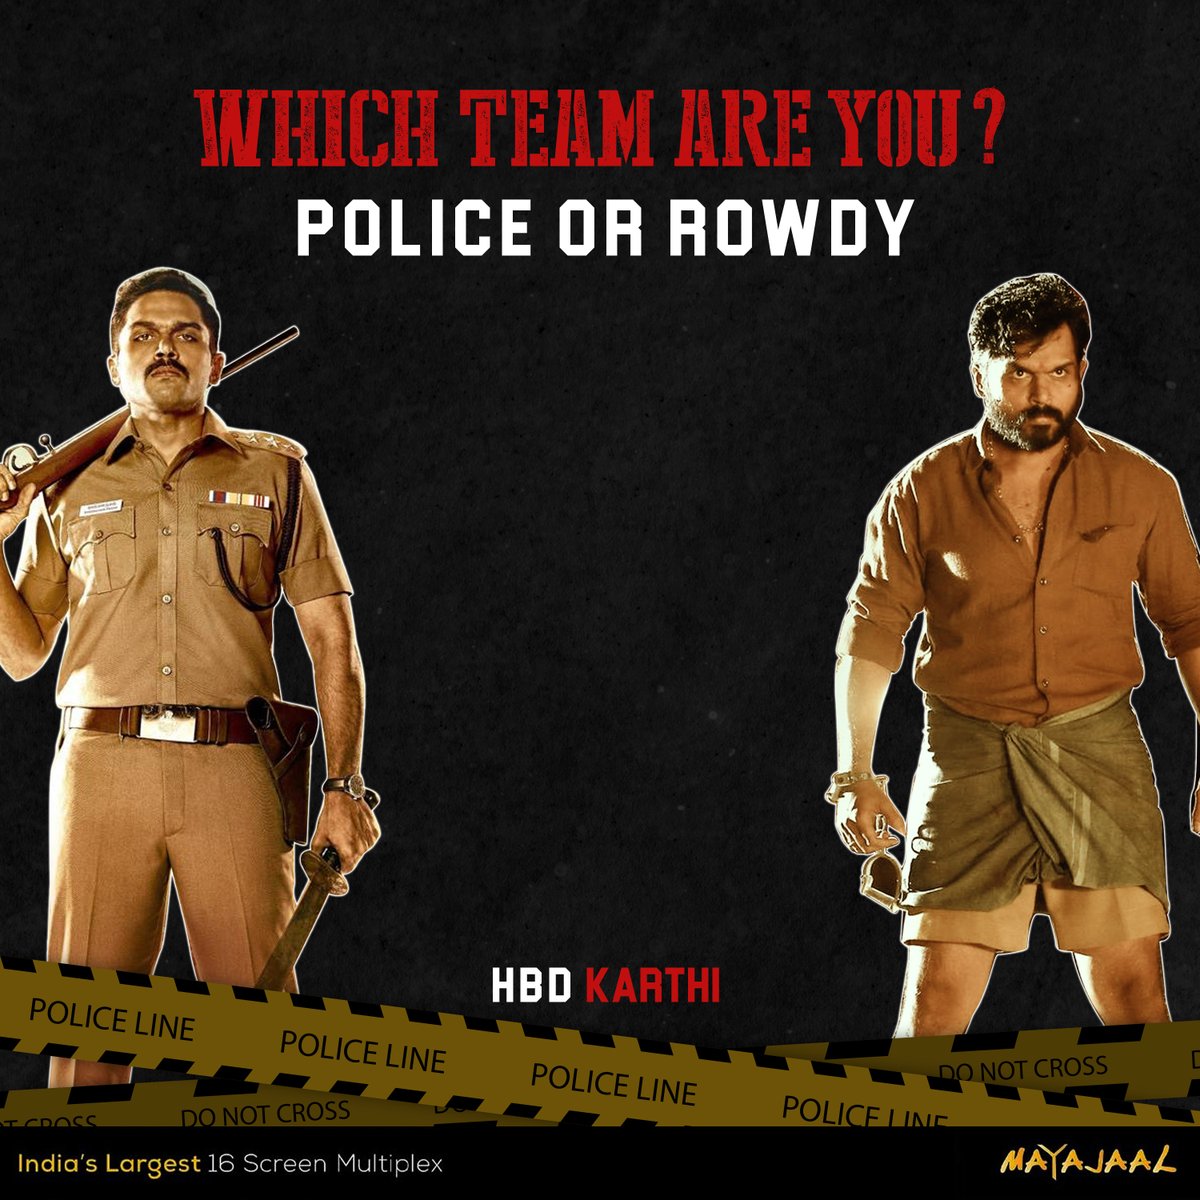 Wishing the ever-smiling @Karthi_Offl a fantastic birthday! ❤️ Which team are you ? Team Rowdy or Team Police ? #HappyBirthdayKarthi #HBDKarthi #Karthi #Mayajaal